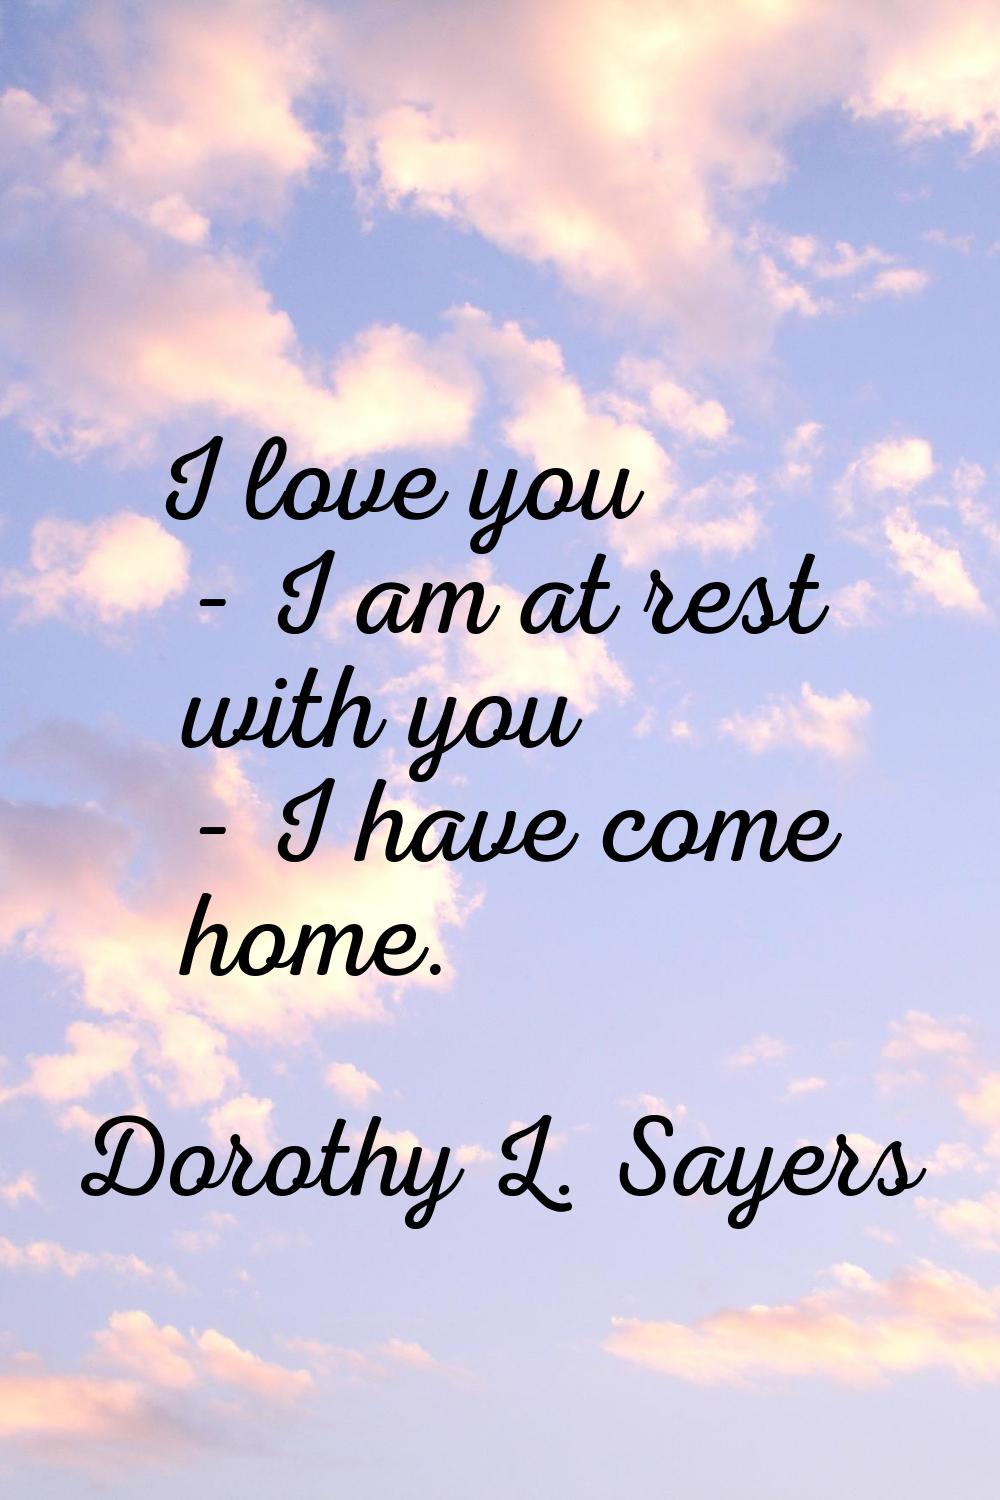 I love you - I am at rest with you - I have come home.